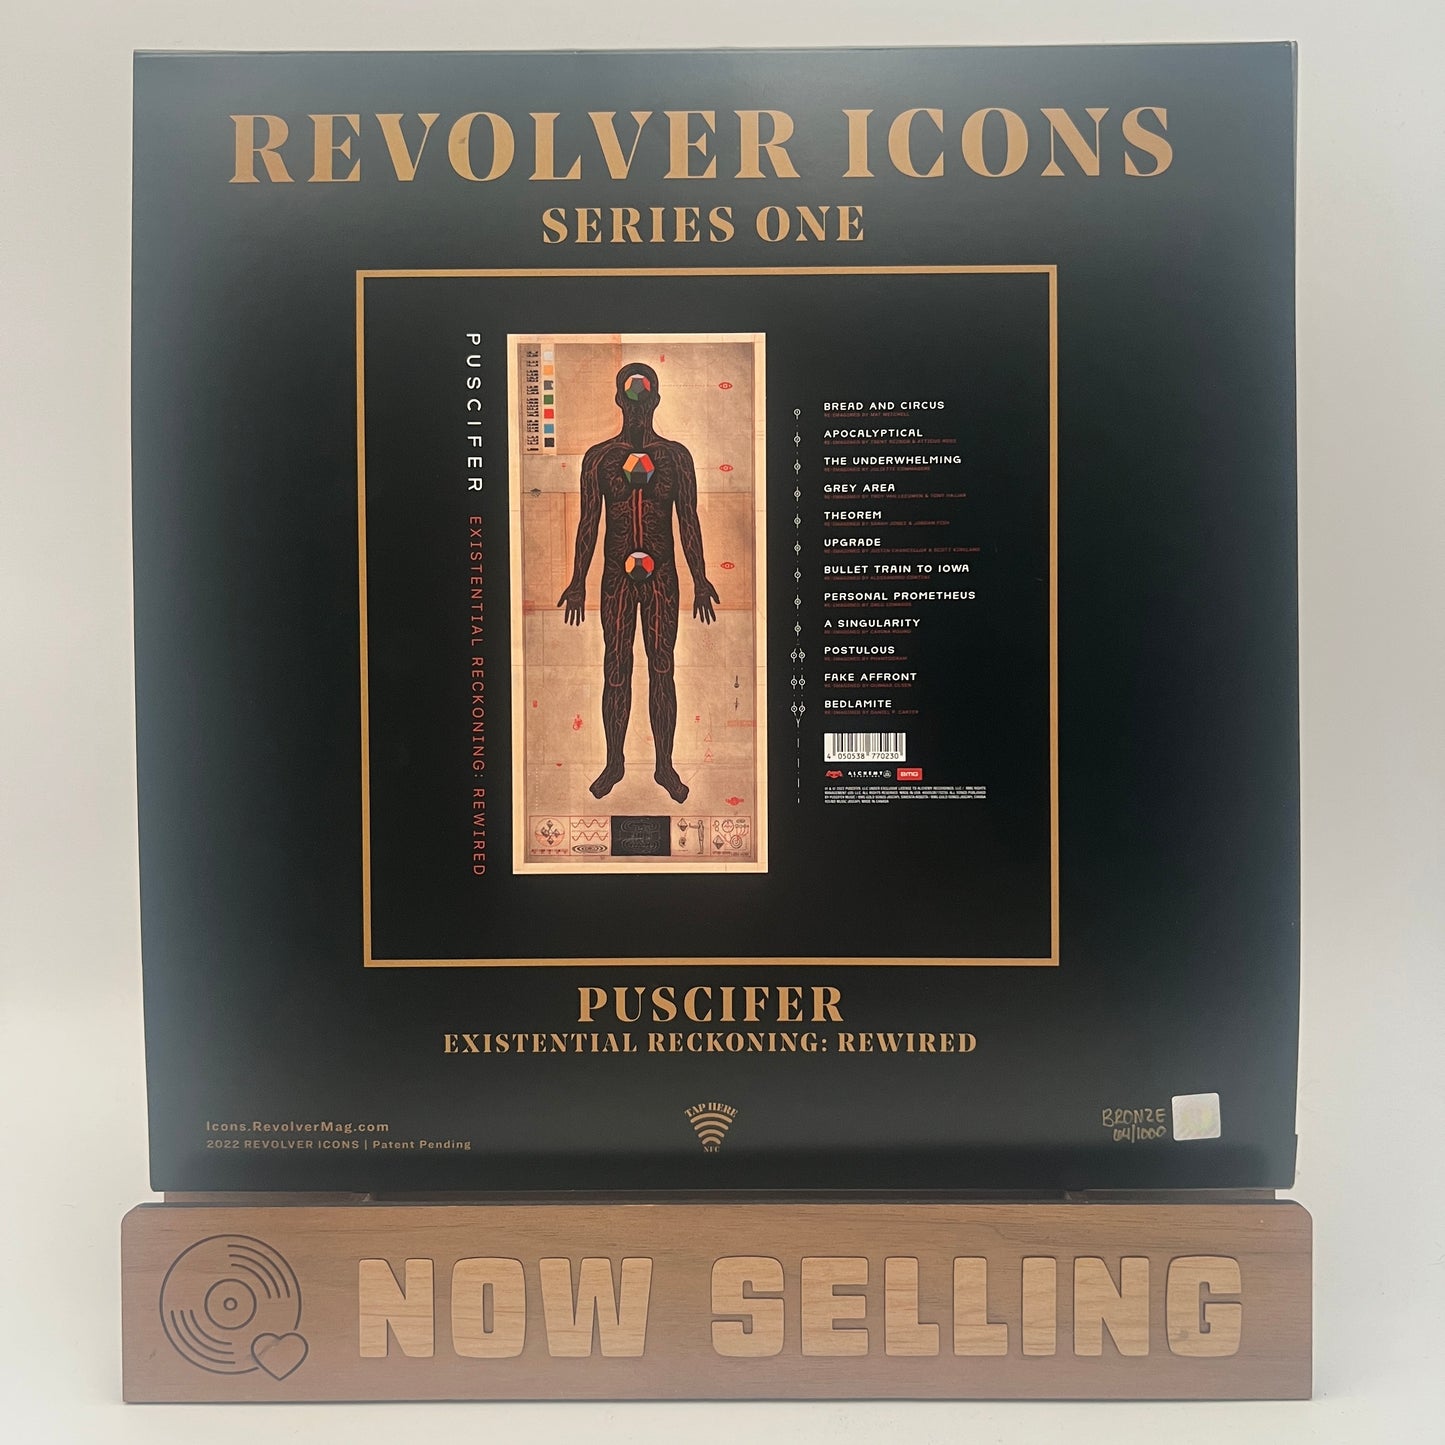 Puscifer - Existential Reckoning: Rewired Vinyl LP Bronze #64 Signed by Carina and Mat